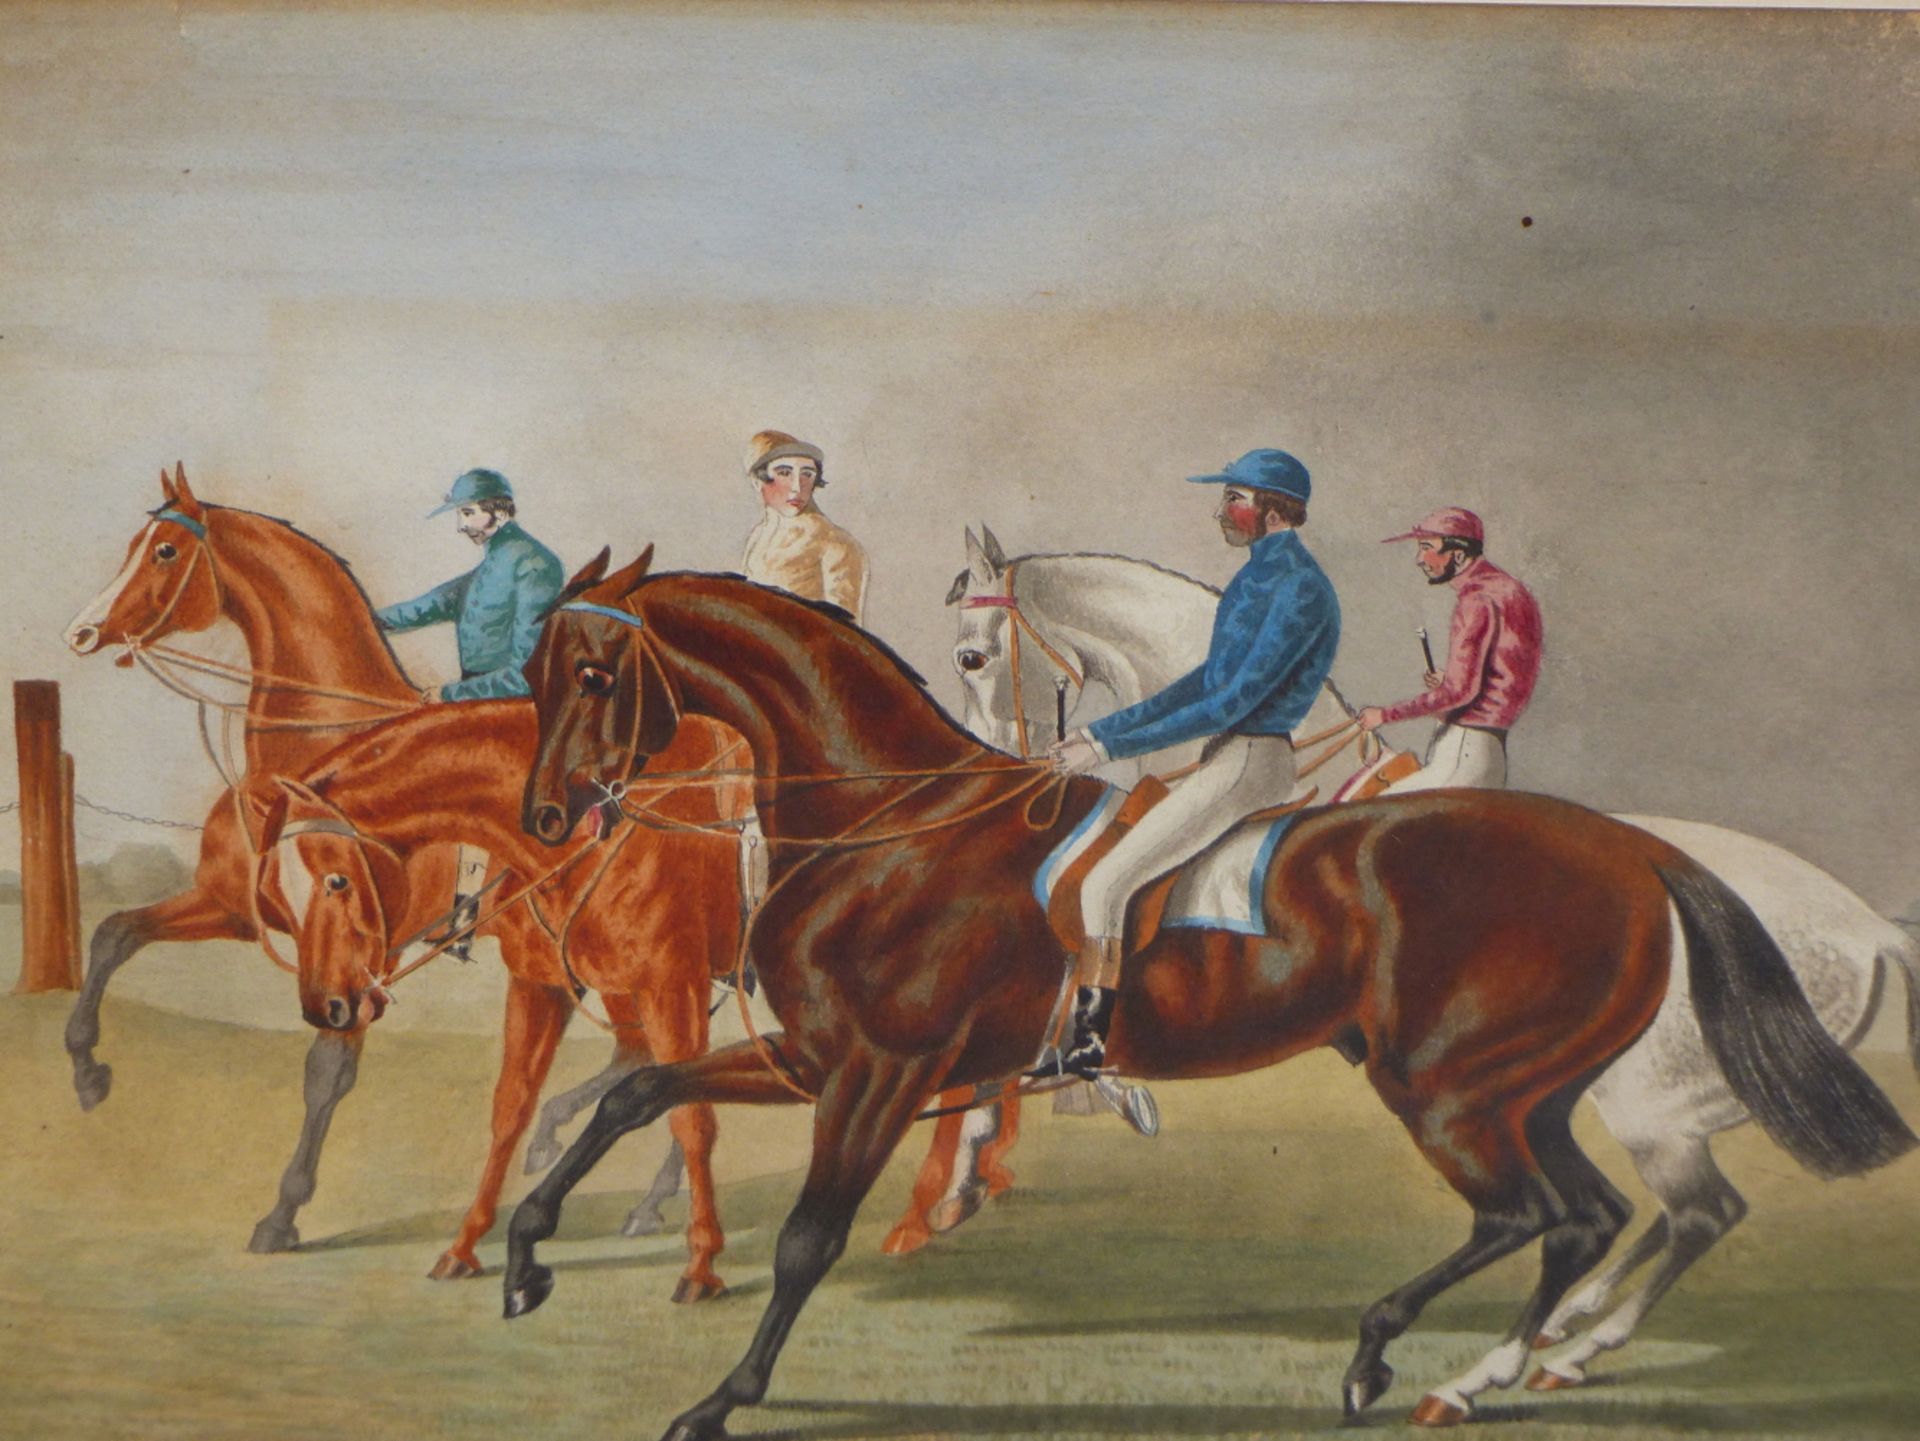 19th C. ENGLISH SCHOOL DANIEL O'ROUKE WINNING HE DERBY 1852, REPUTEDLY BY JAMES G. NOBLE, - Image 14 of 26